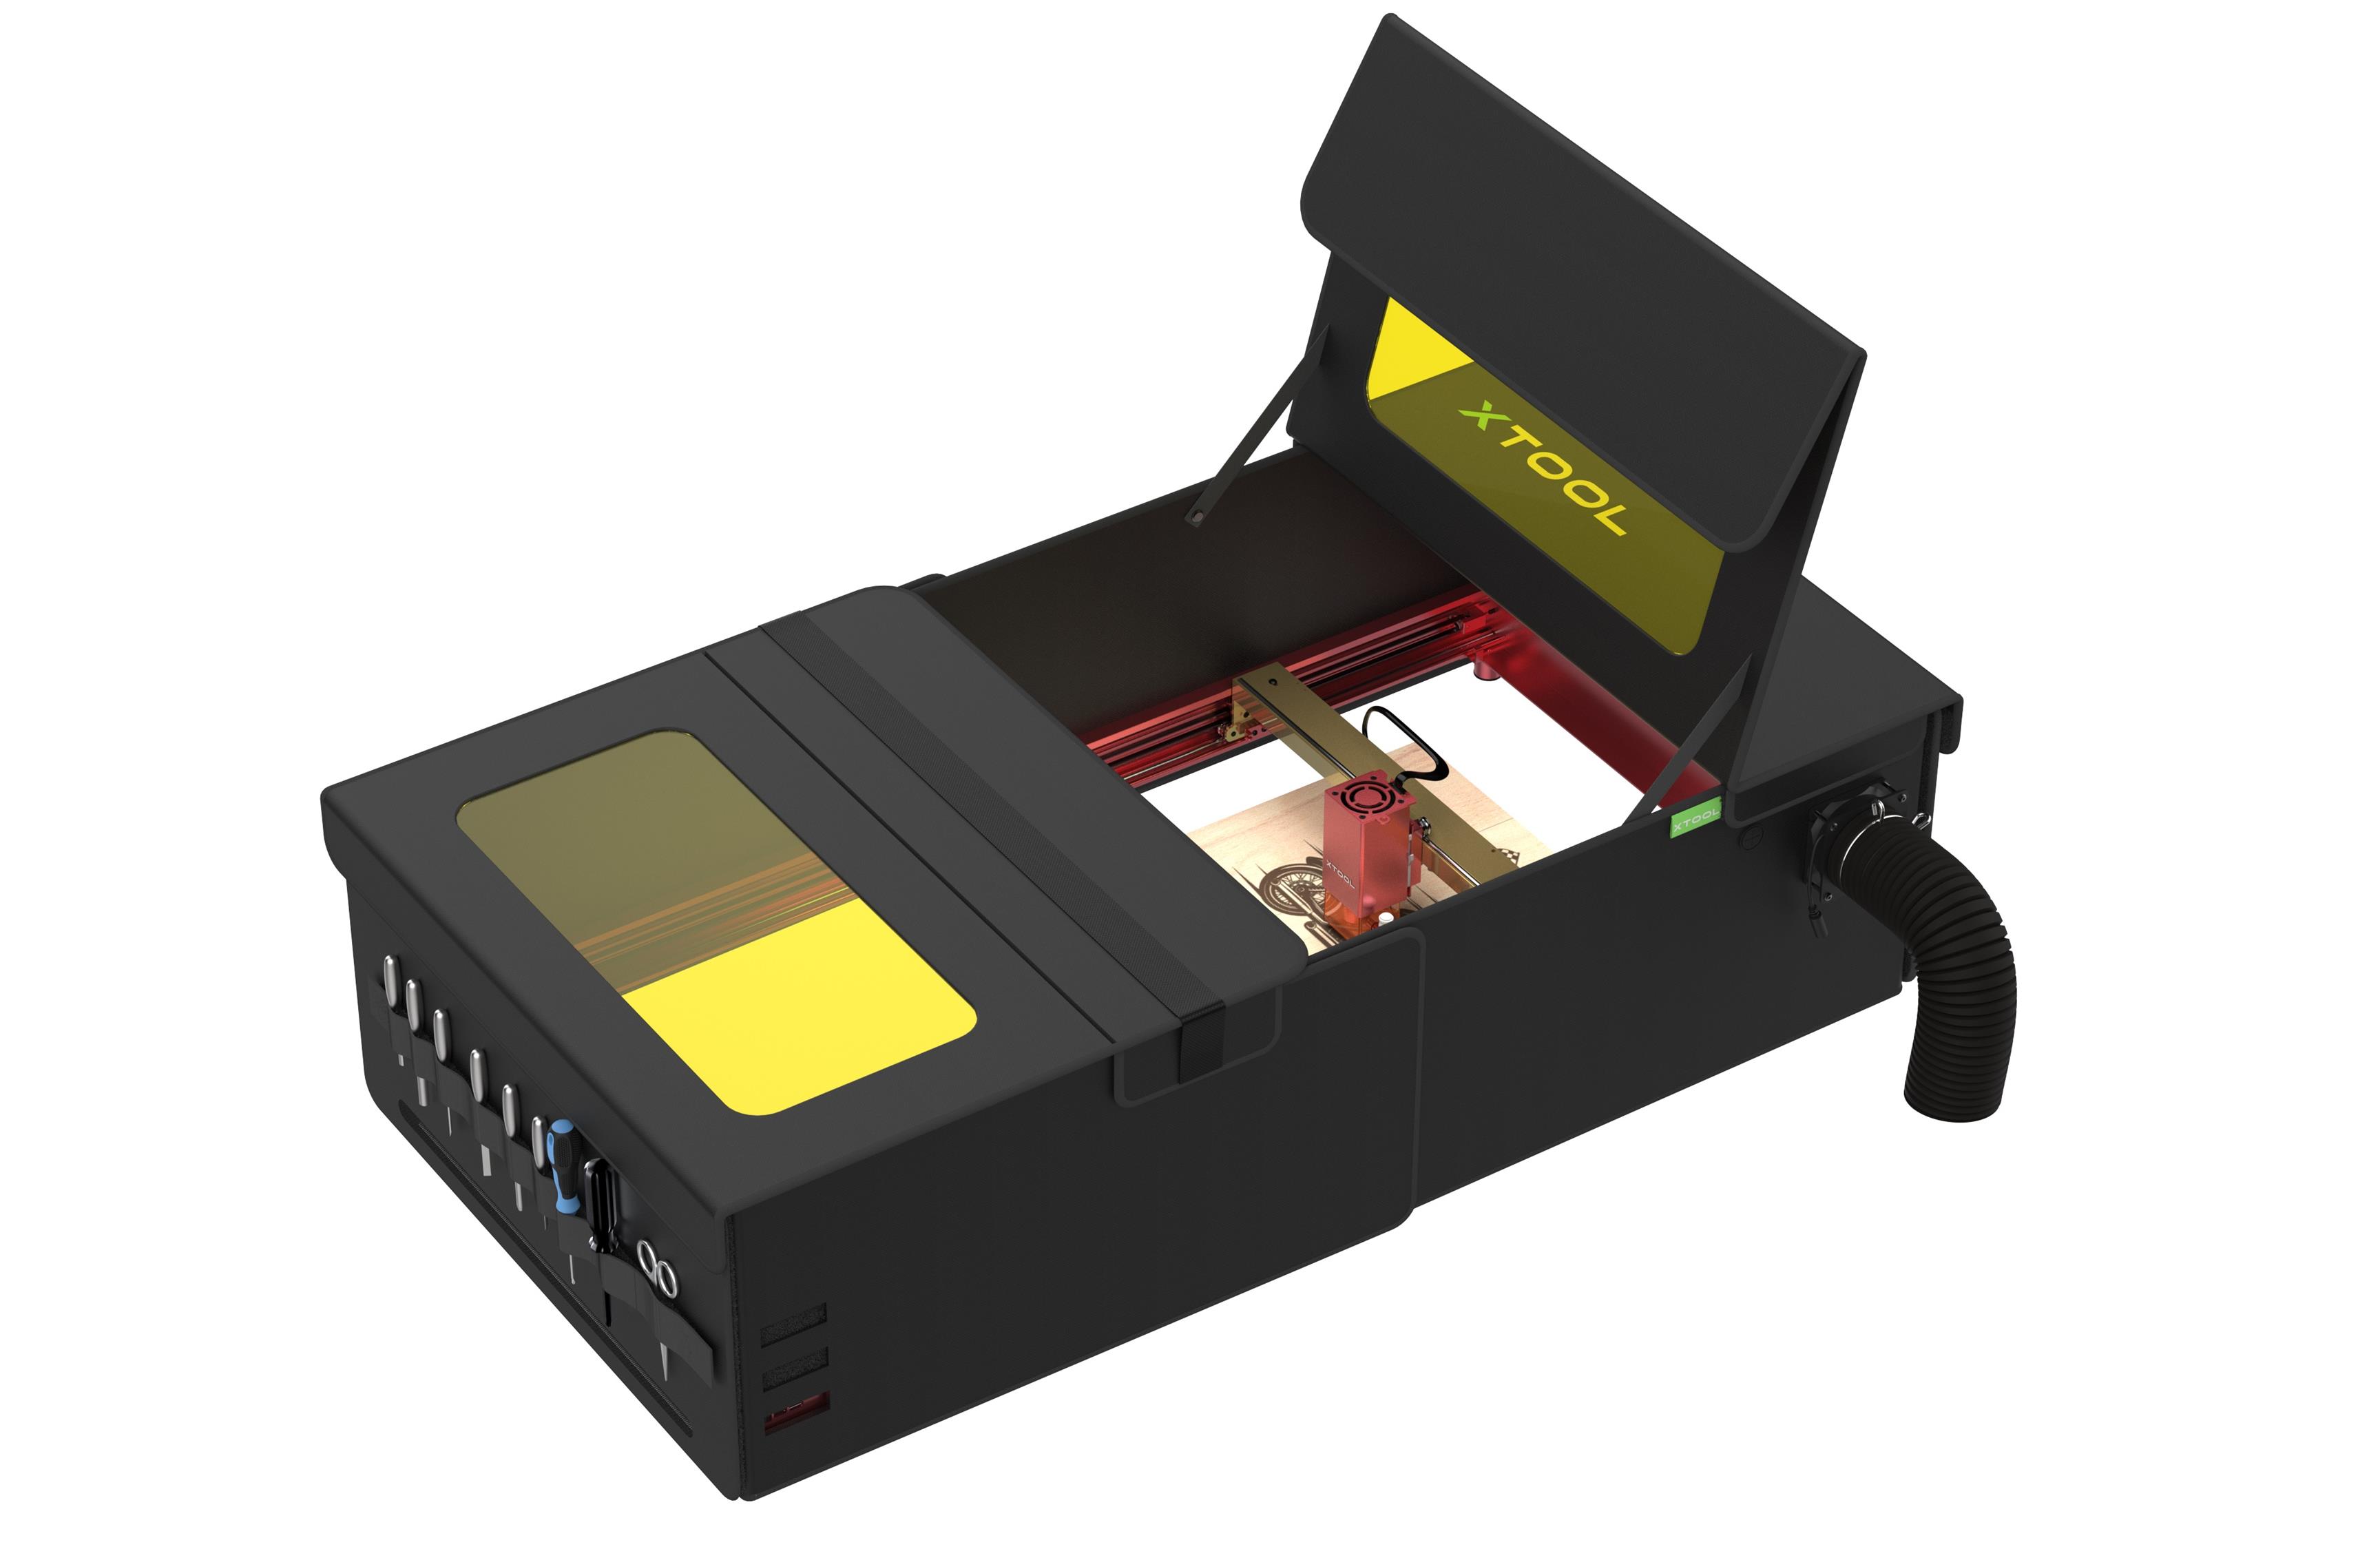 xTool Enclosure Max for xTool D1, D1 Pro and Most Laser Engraver